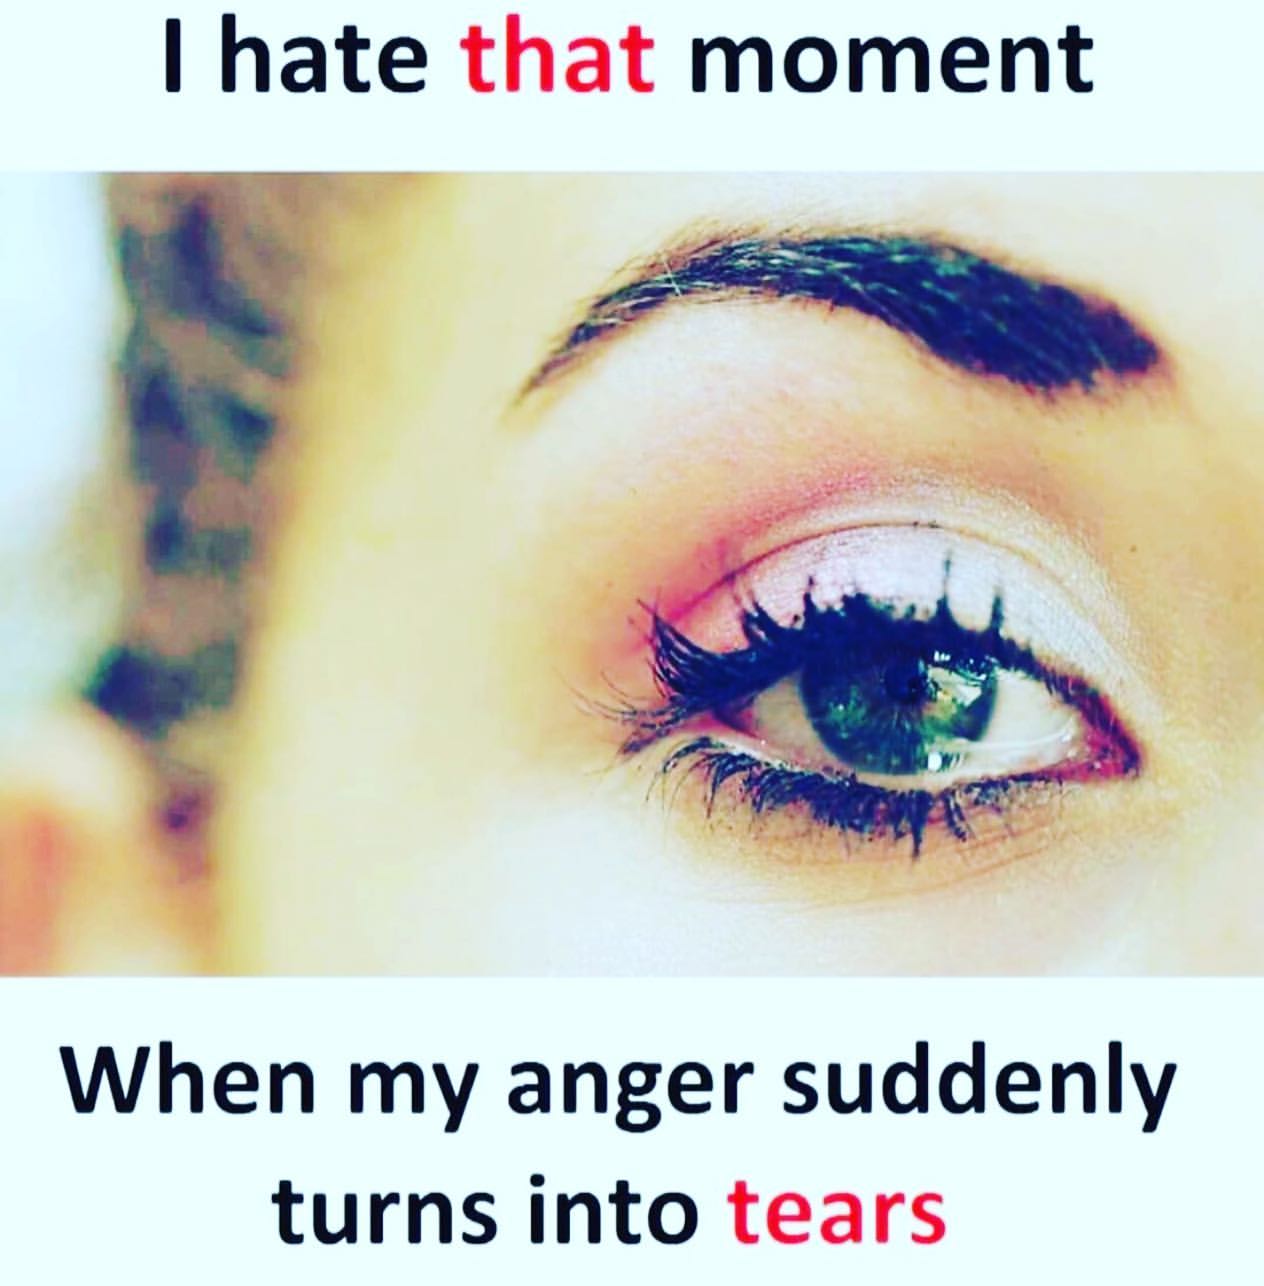 I hate that moment when my anger suddenly turns into tears.